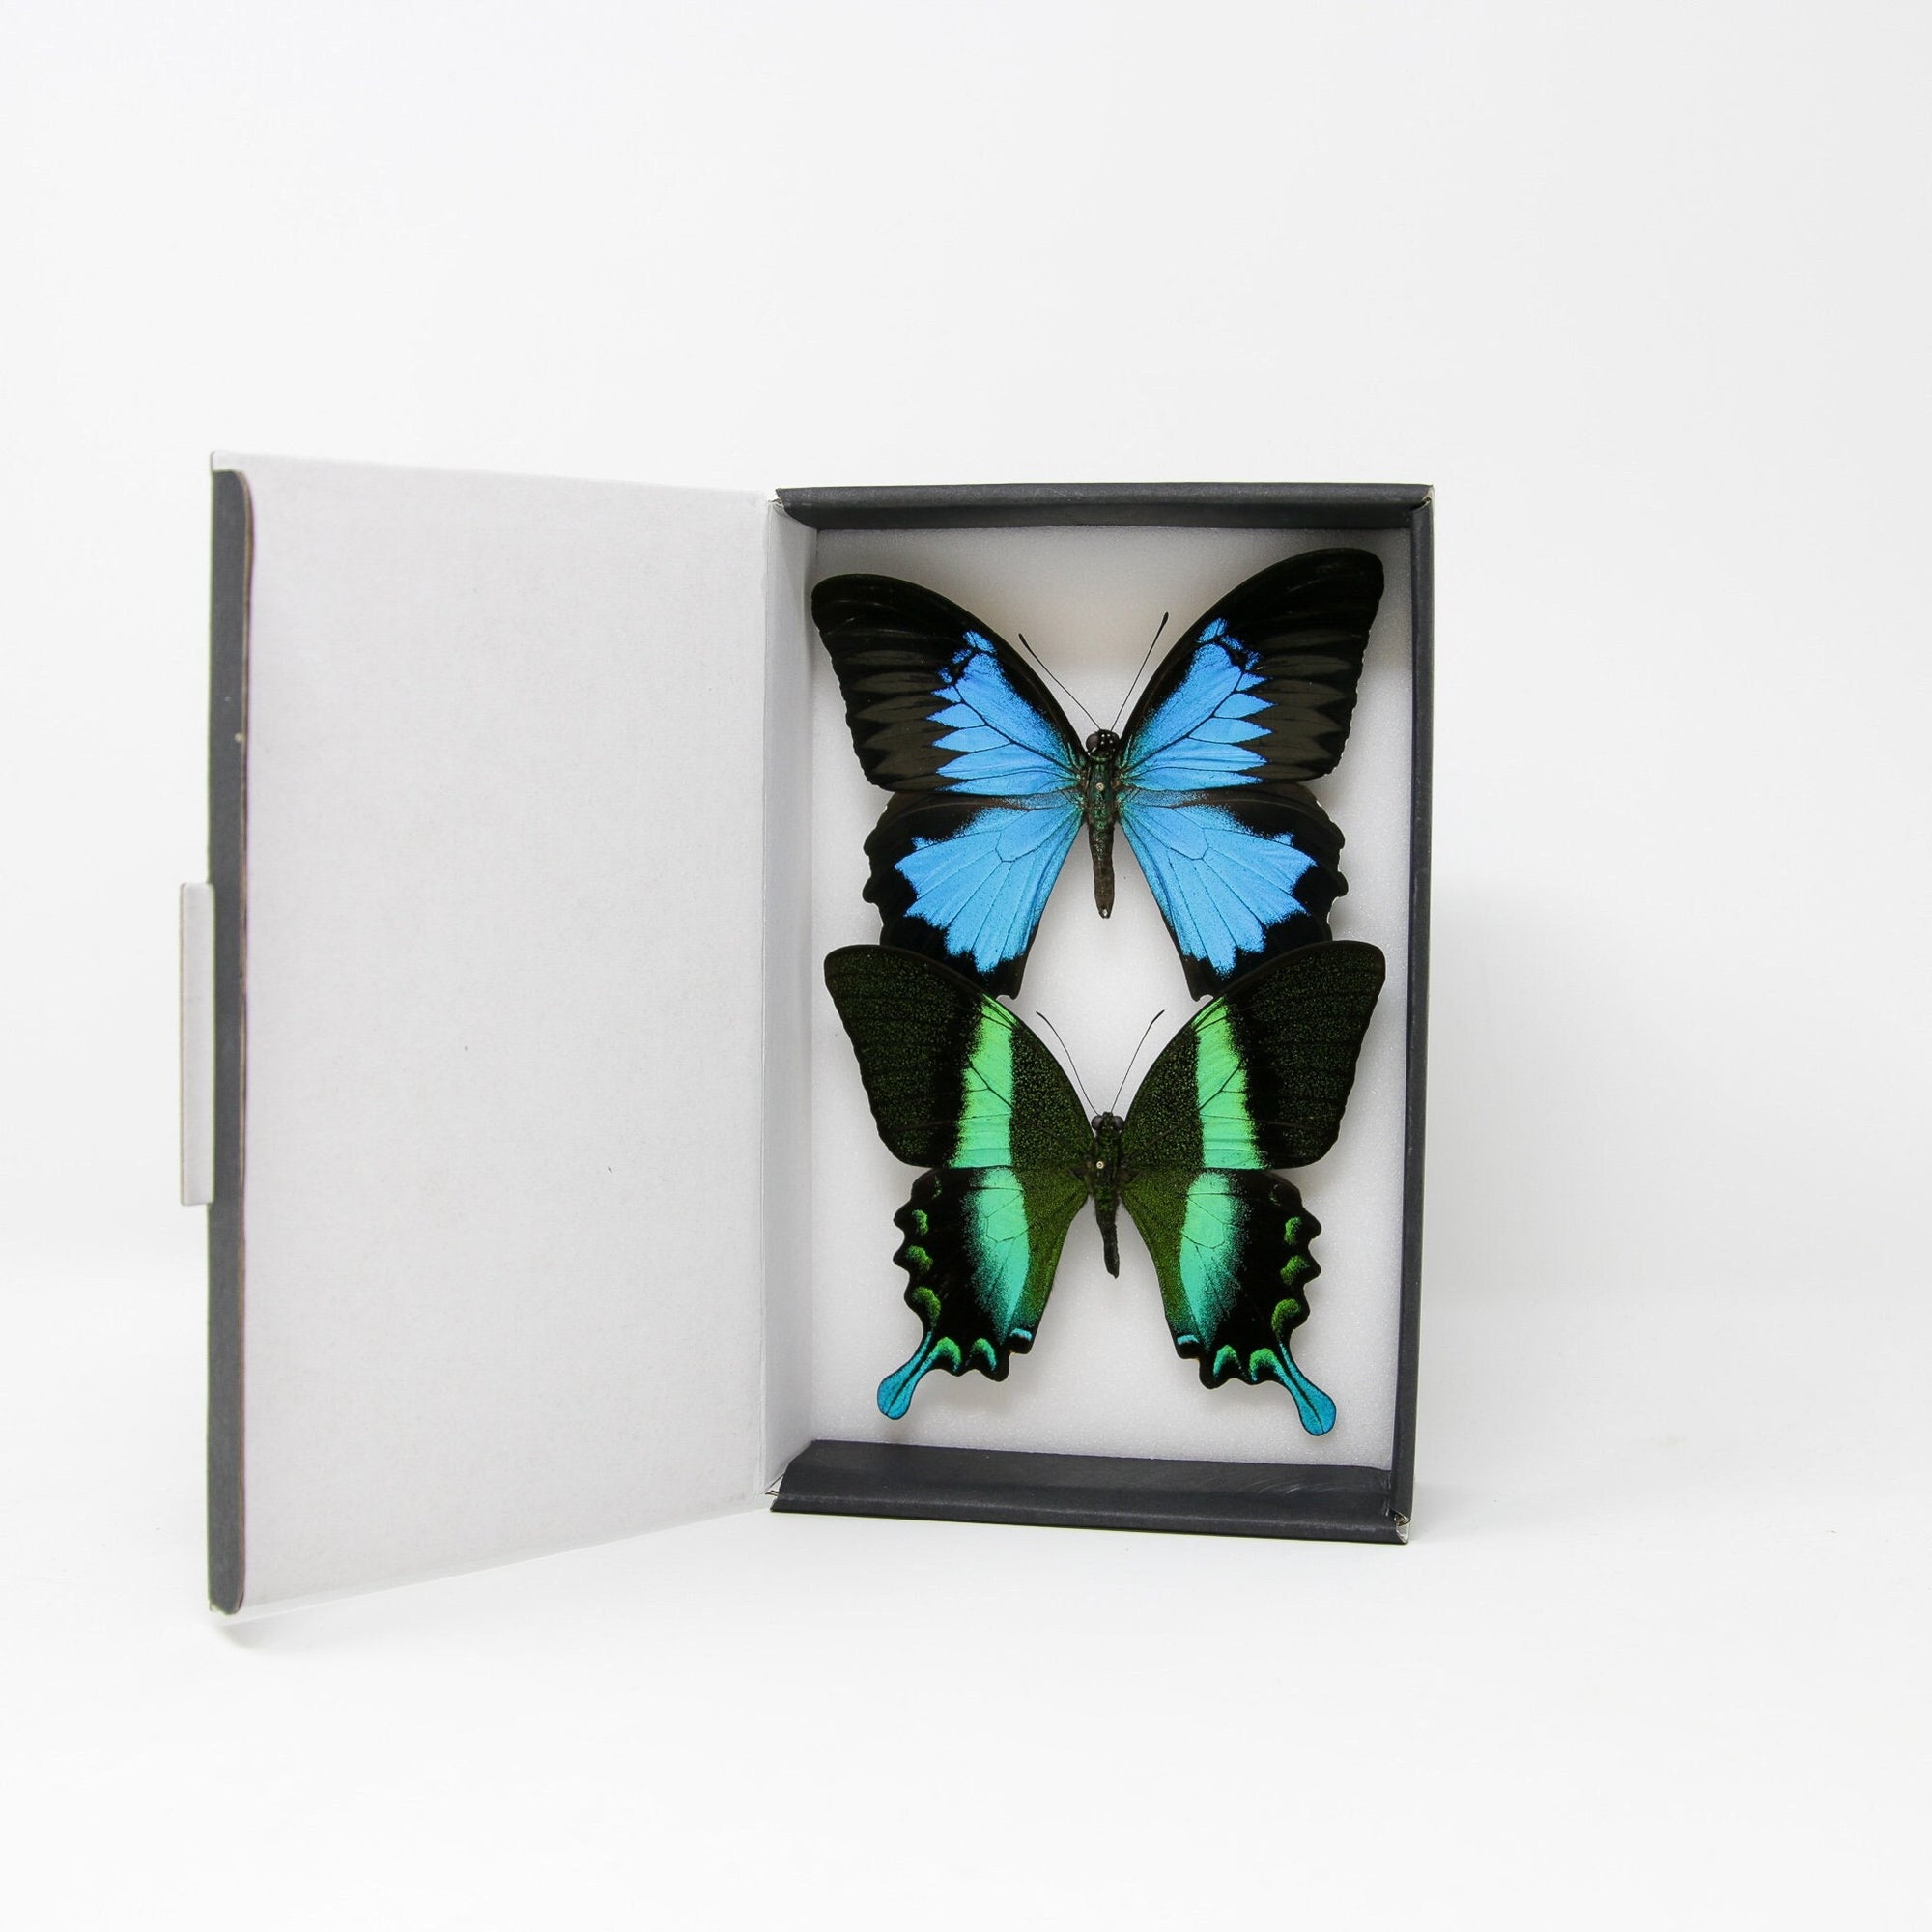 TWO (2) Real Green & Blue Swallowtail Butterflies (Papilio blumei, P. ulysses) A1 Quality SET SPECIMENS, Lepidoptera Entomology Box #SE59